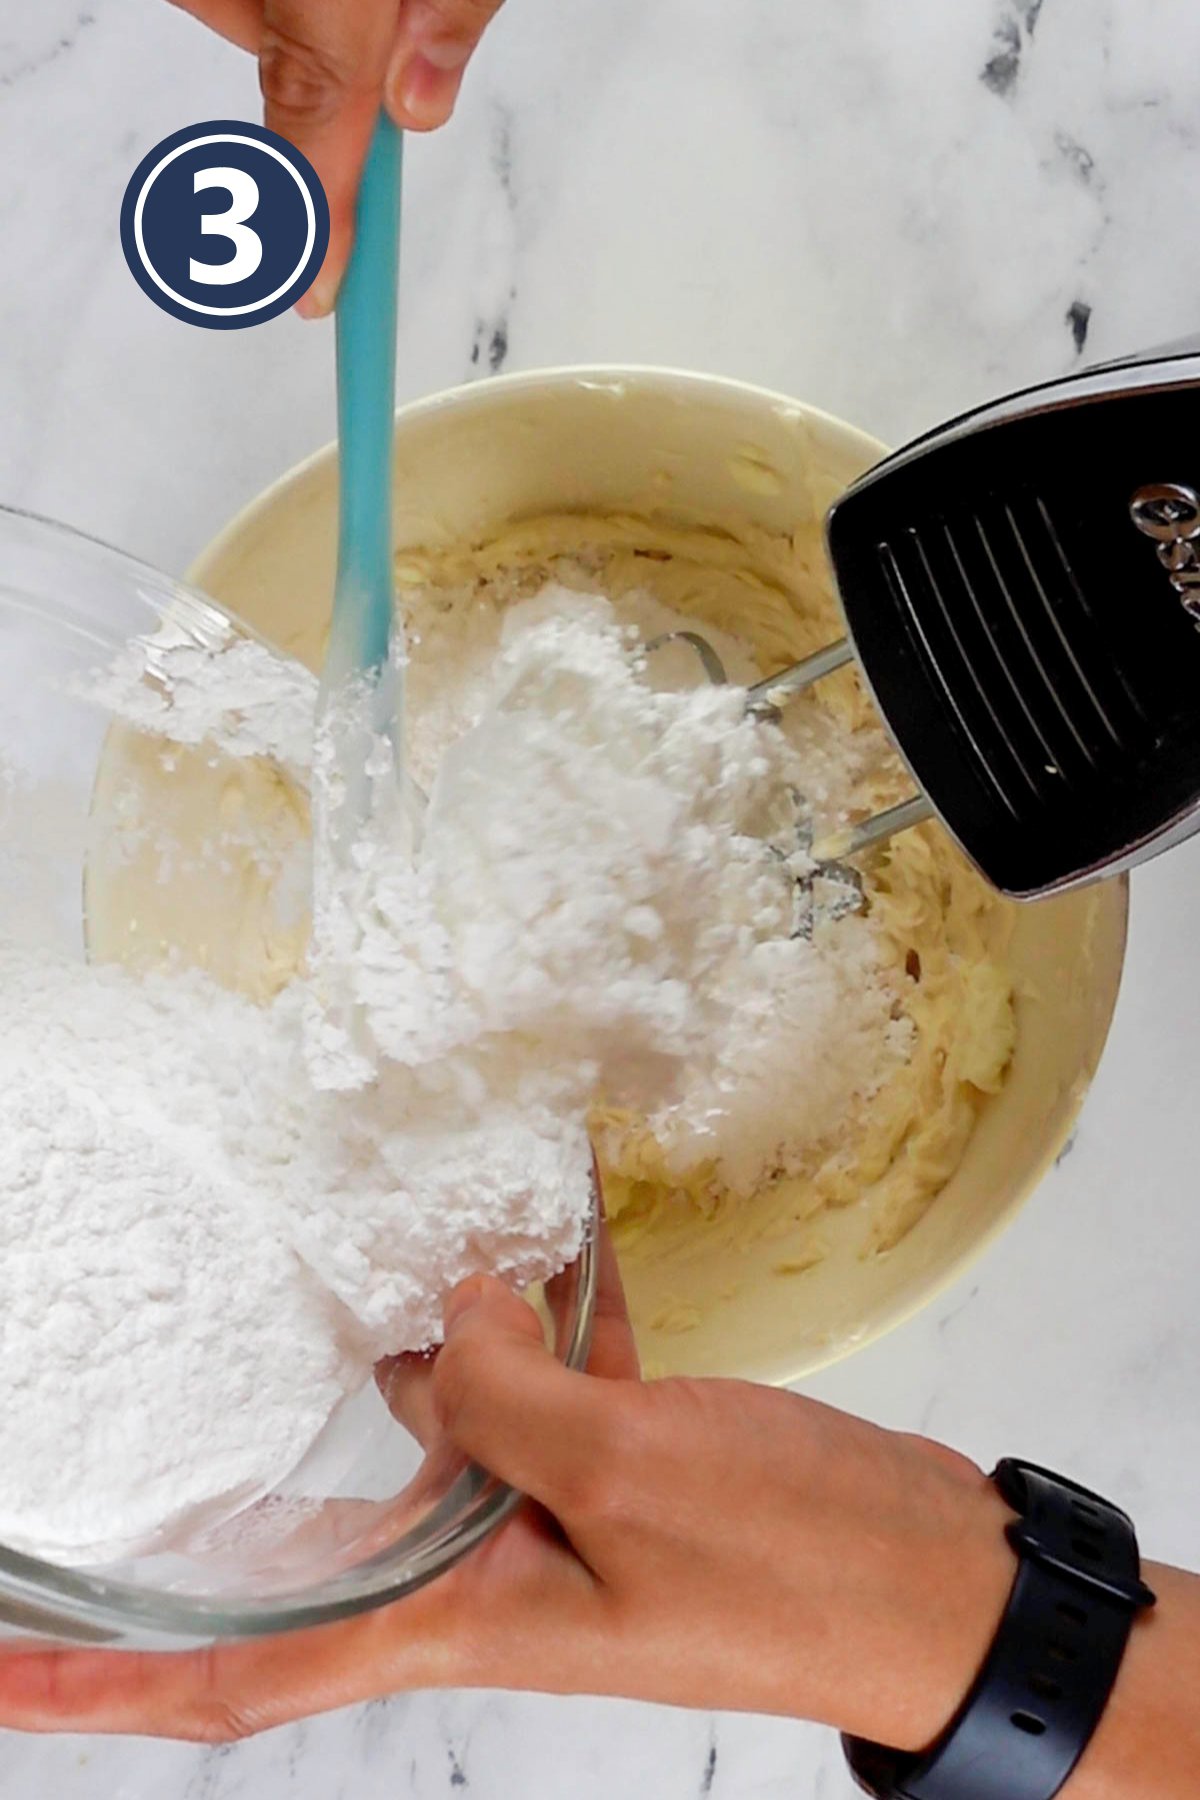 adding powder sugar in the cream cheese to make frosting.